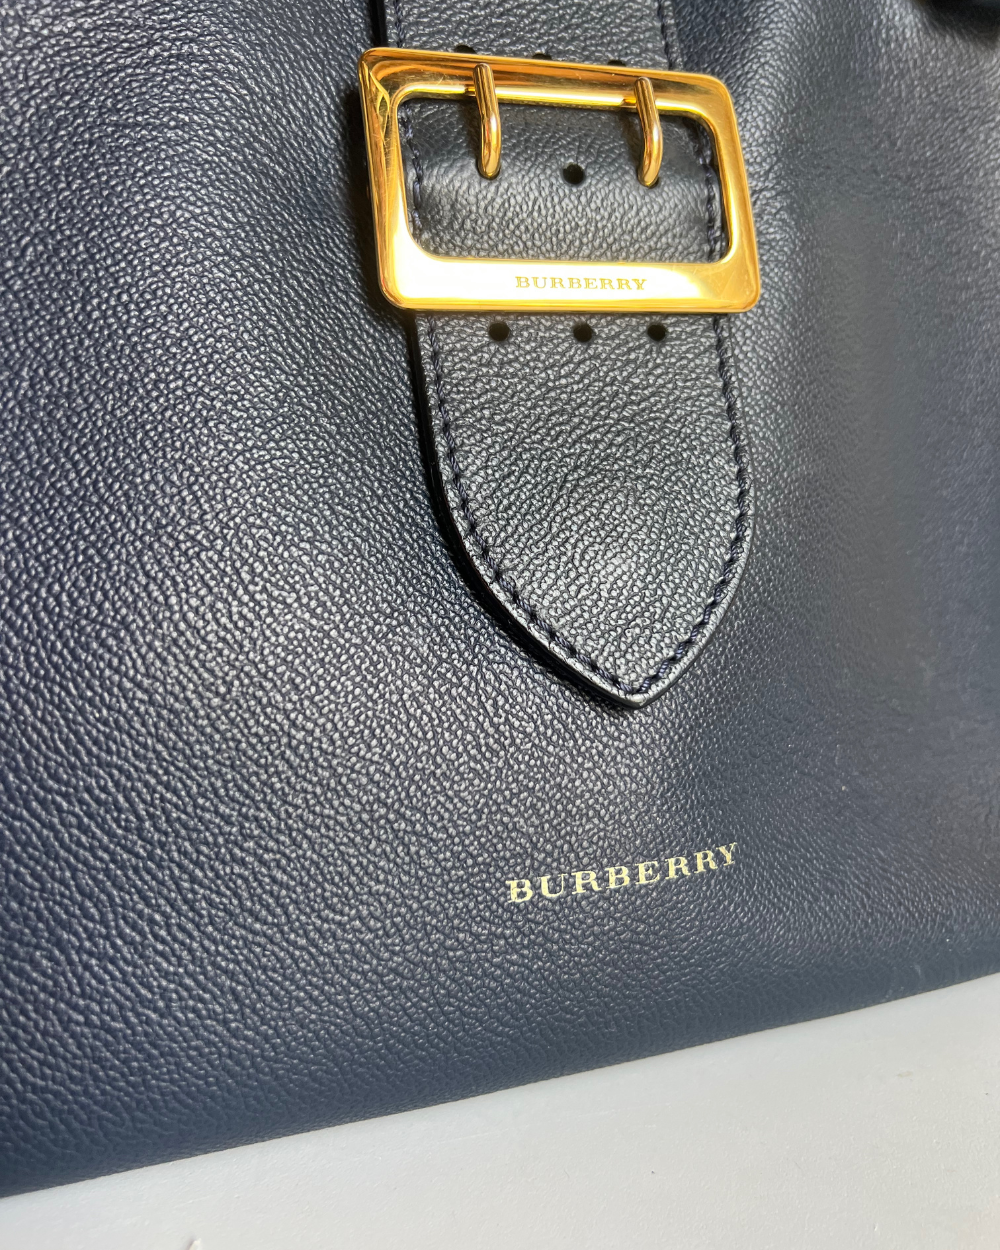 Burberry Navy Leather Buckle Tote Bag